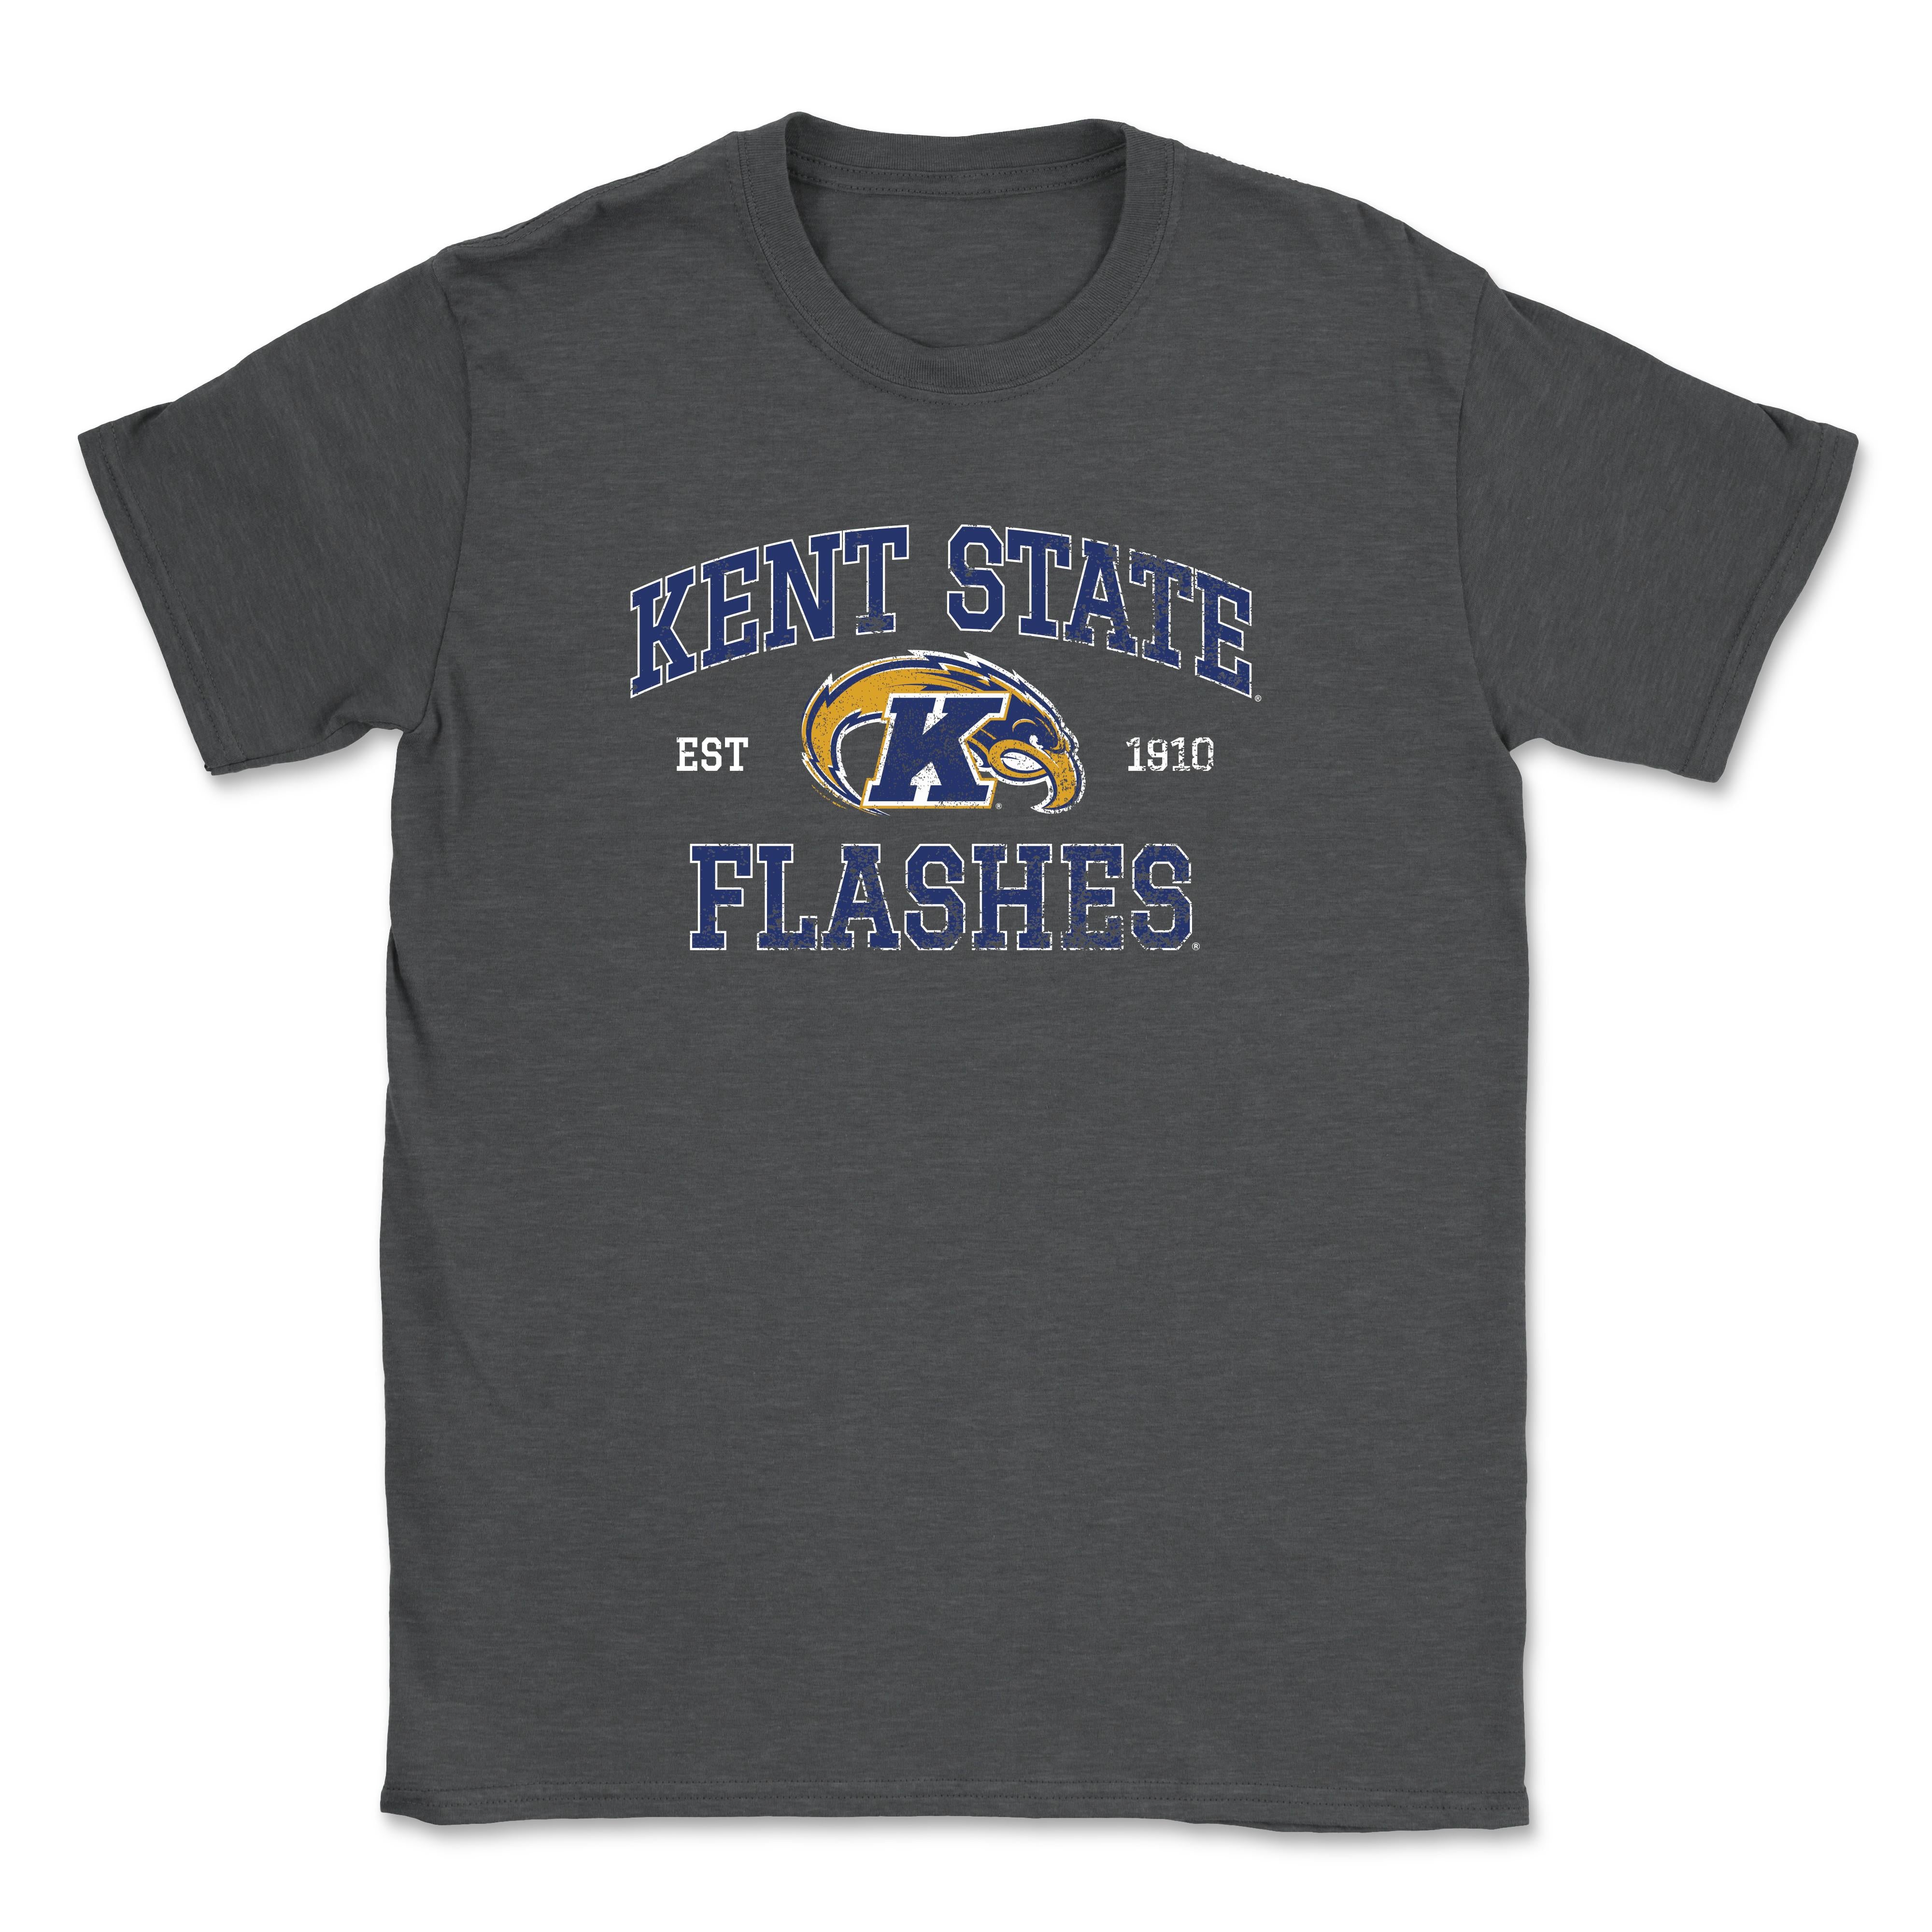 Kent State Gray Arched Distress Eagle T-Shirt